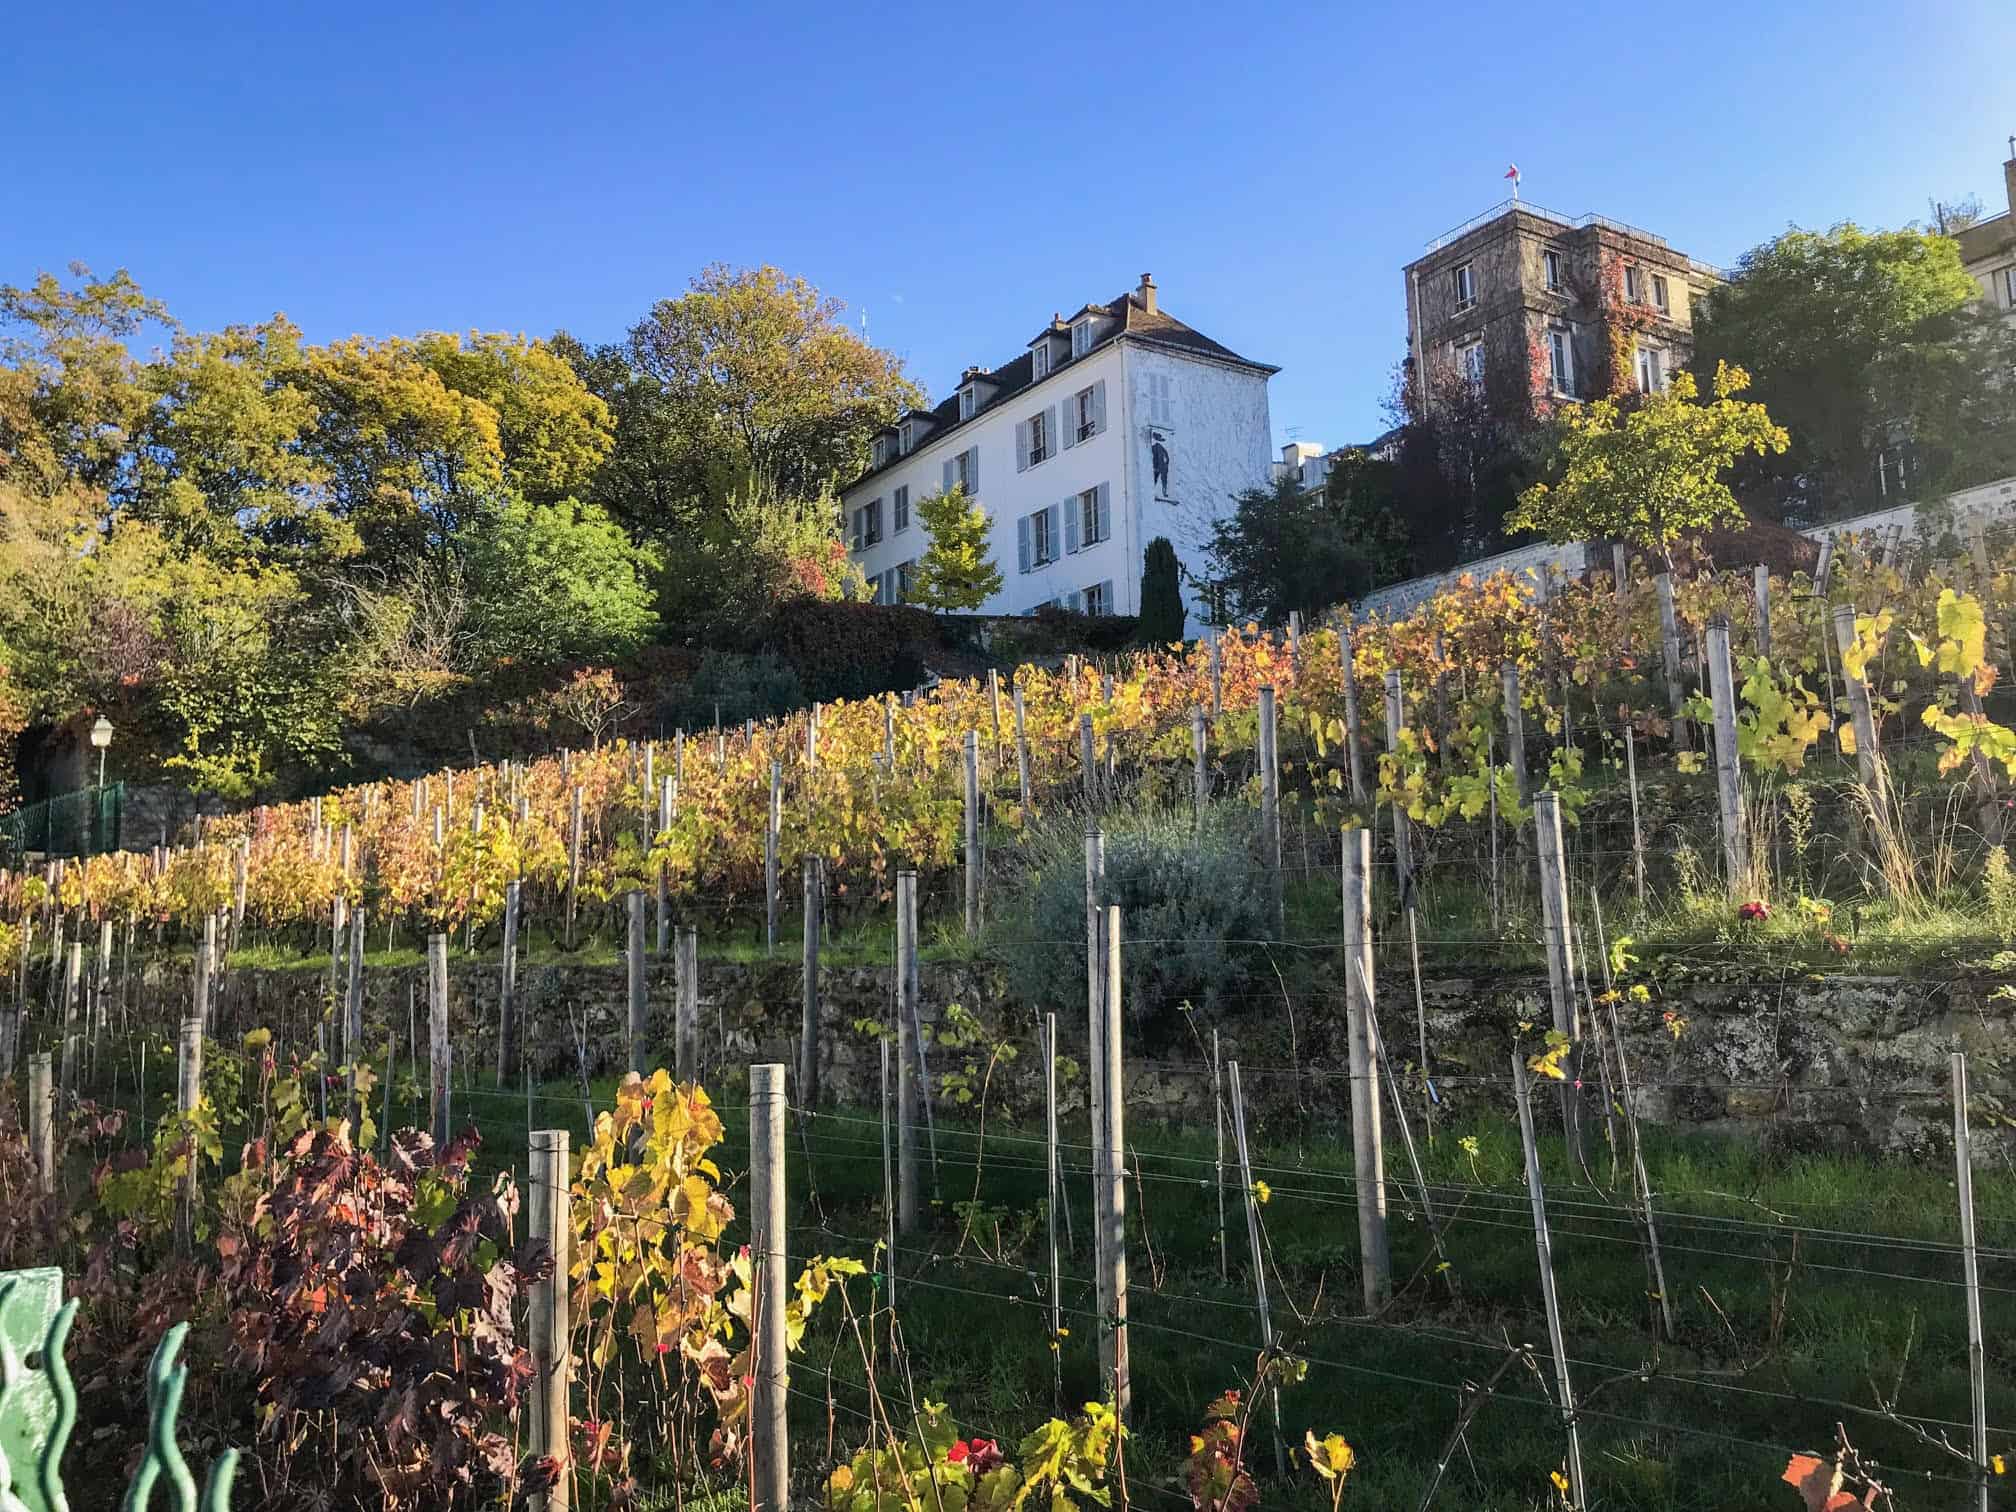 one of the strangest hidden gems in Paris Montmartre Vineyard is found on the city streets